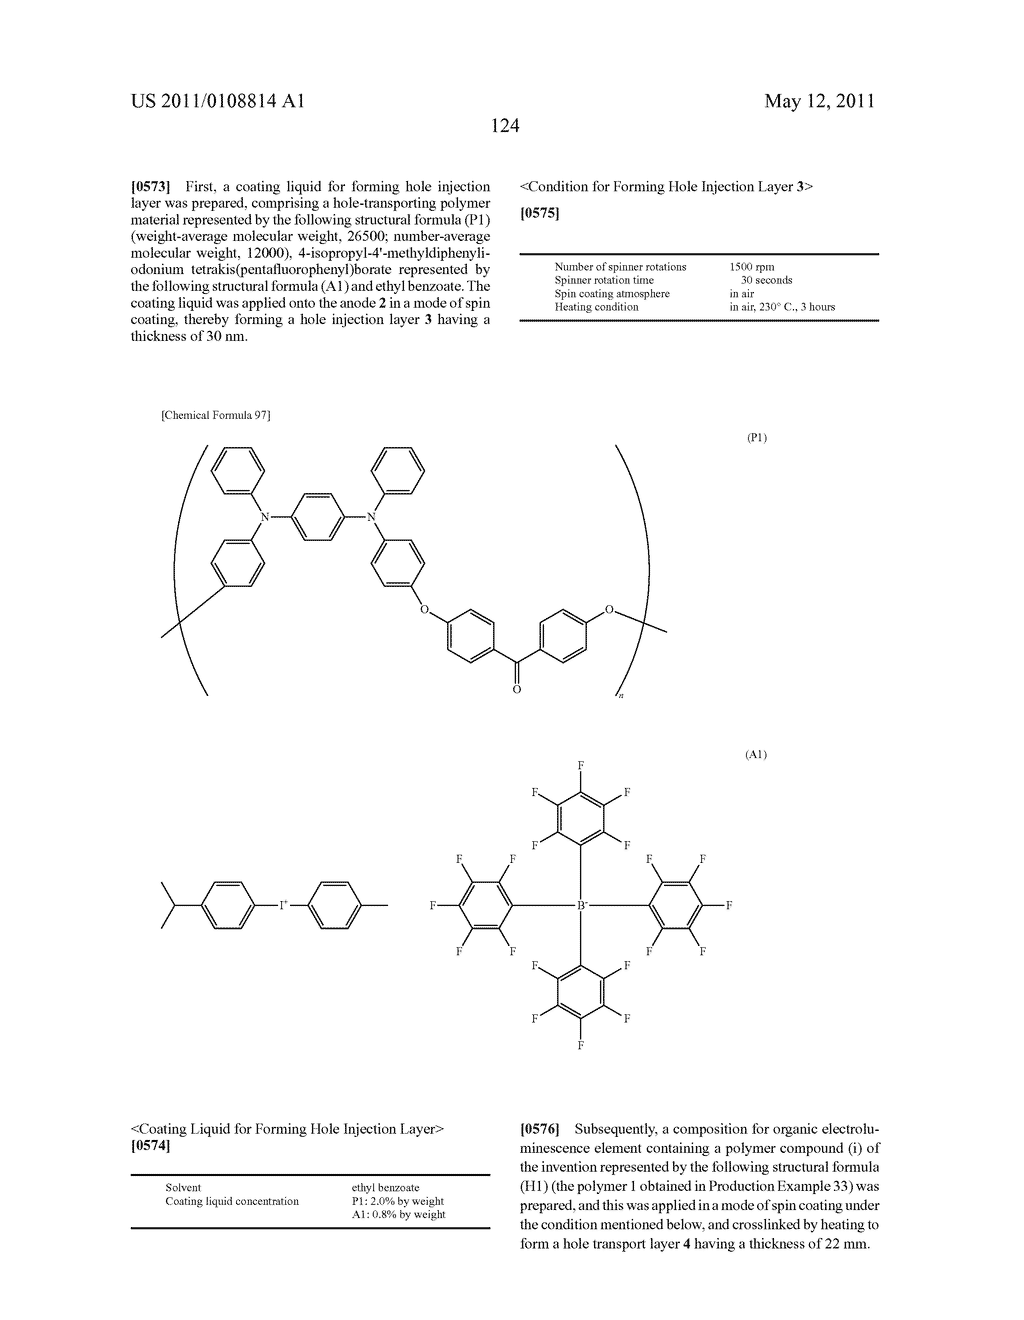 POLYMER COMPOUND, NET-LIKE POLYMER COMPOUND PRODUCED BY CROSSLINKING THE POLYMER COMPOUND, COMPOSITION FOR ORGANIC ELECTROLUMINESCENCE ELEMENT, ORGANIC ELECTROLUMINESCENCE ELEMENT, ORGANIC EL DISPLAY, AND ORGANIC EL LIGHTING - diagram, schematic, and image 126